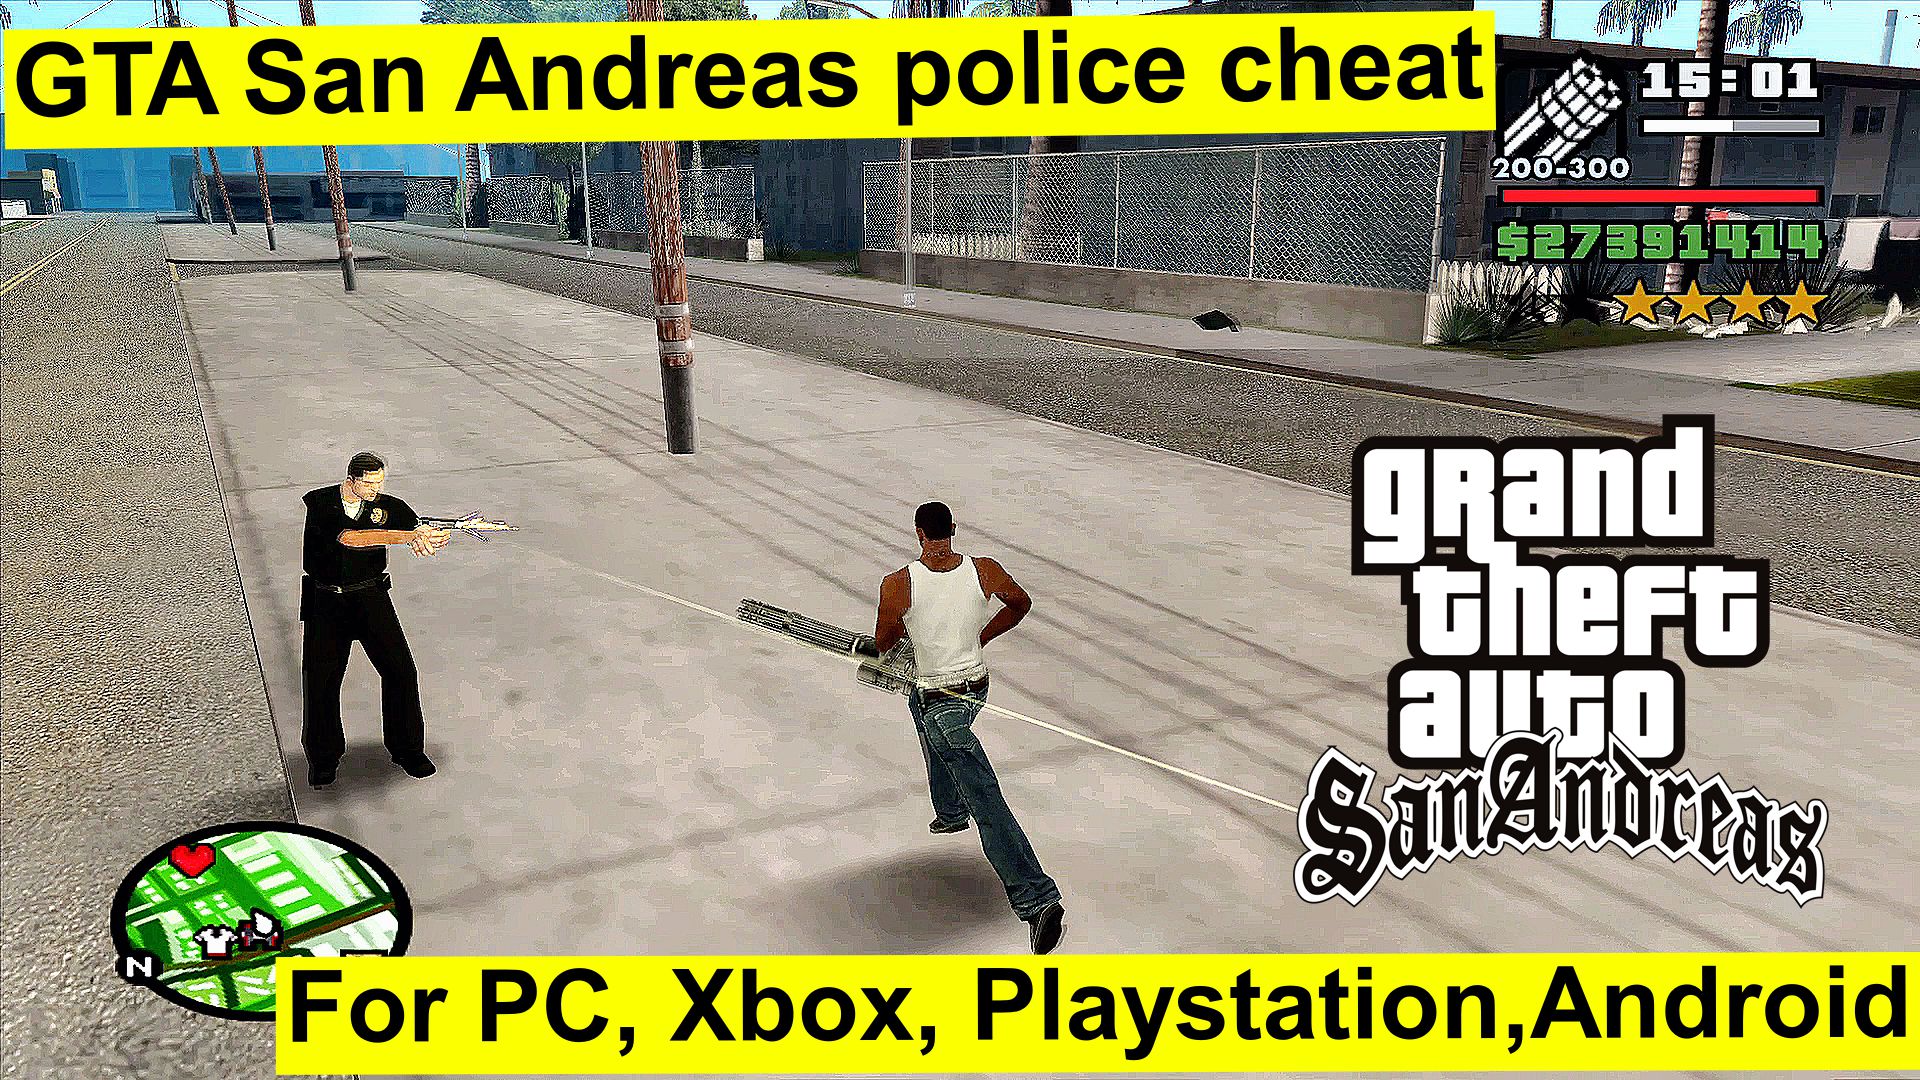 GTA San Andreas police cheat for PC, Xbox, Playstation,Android